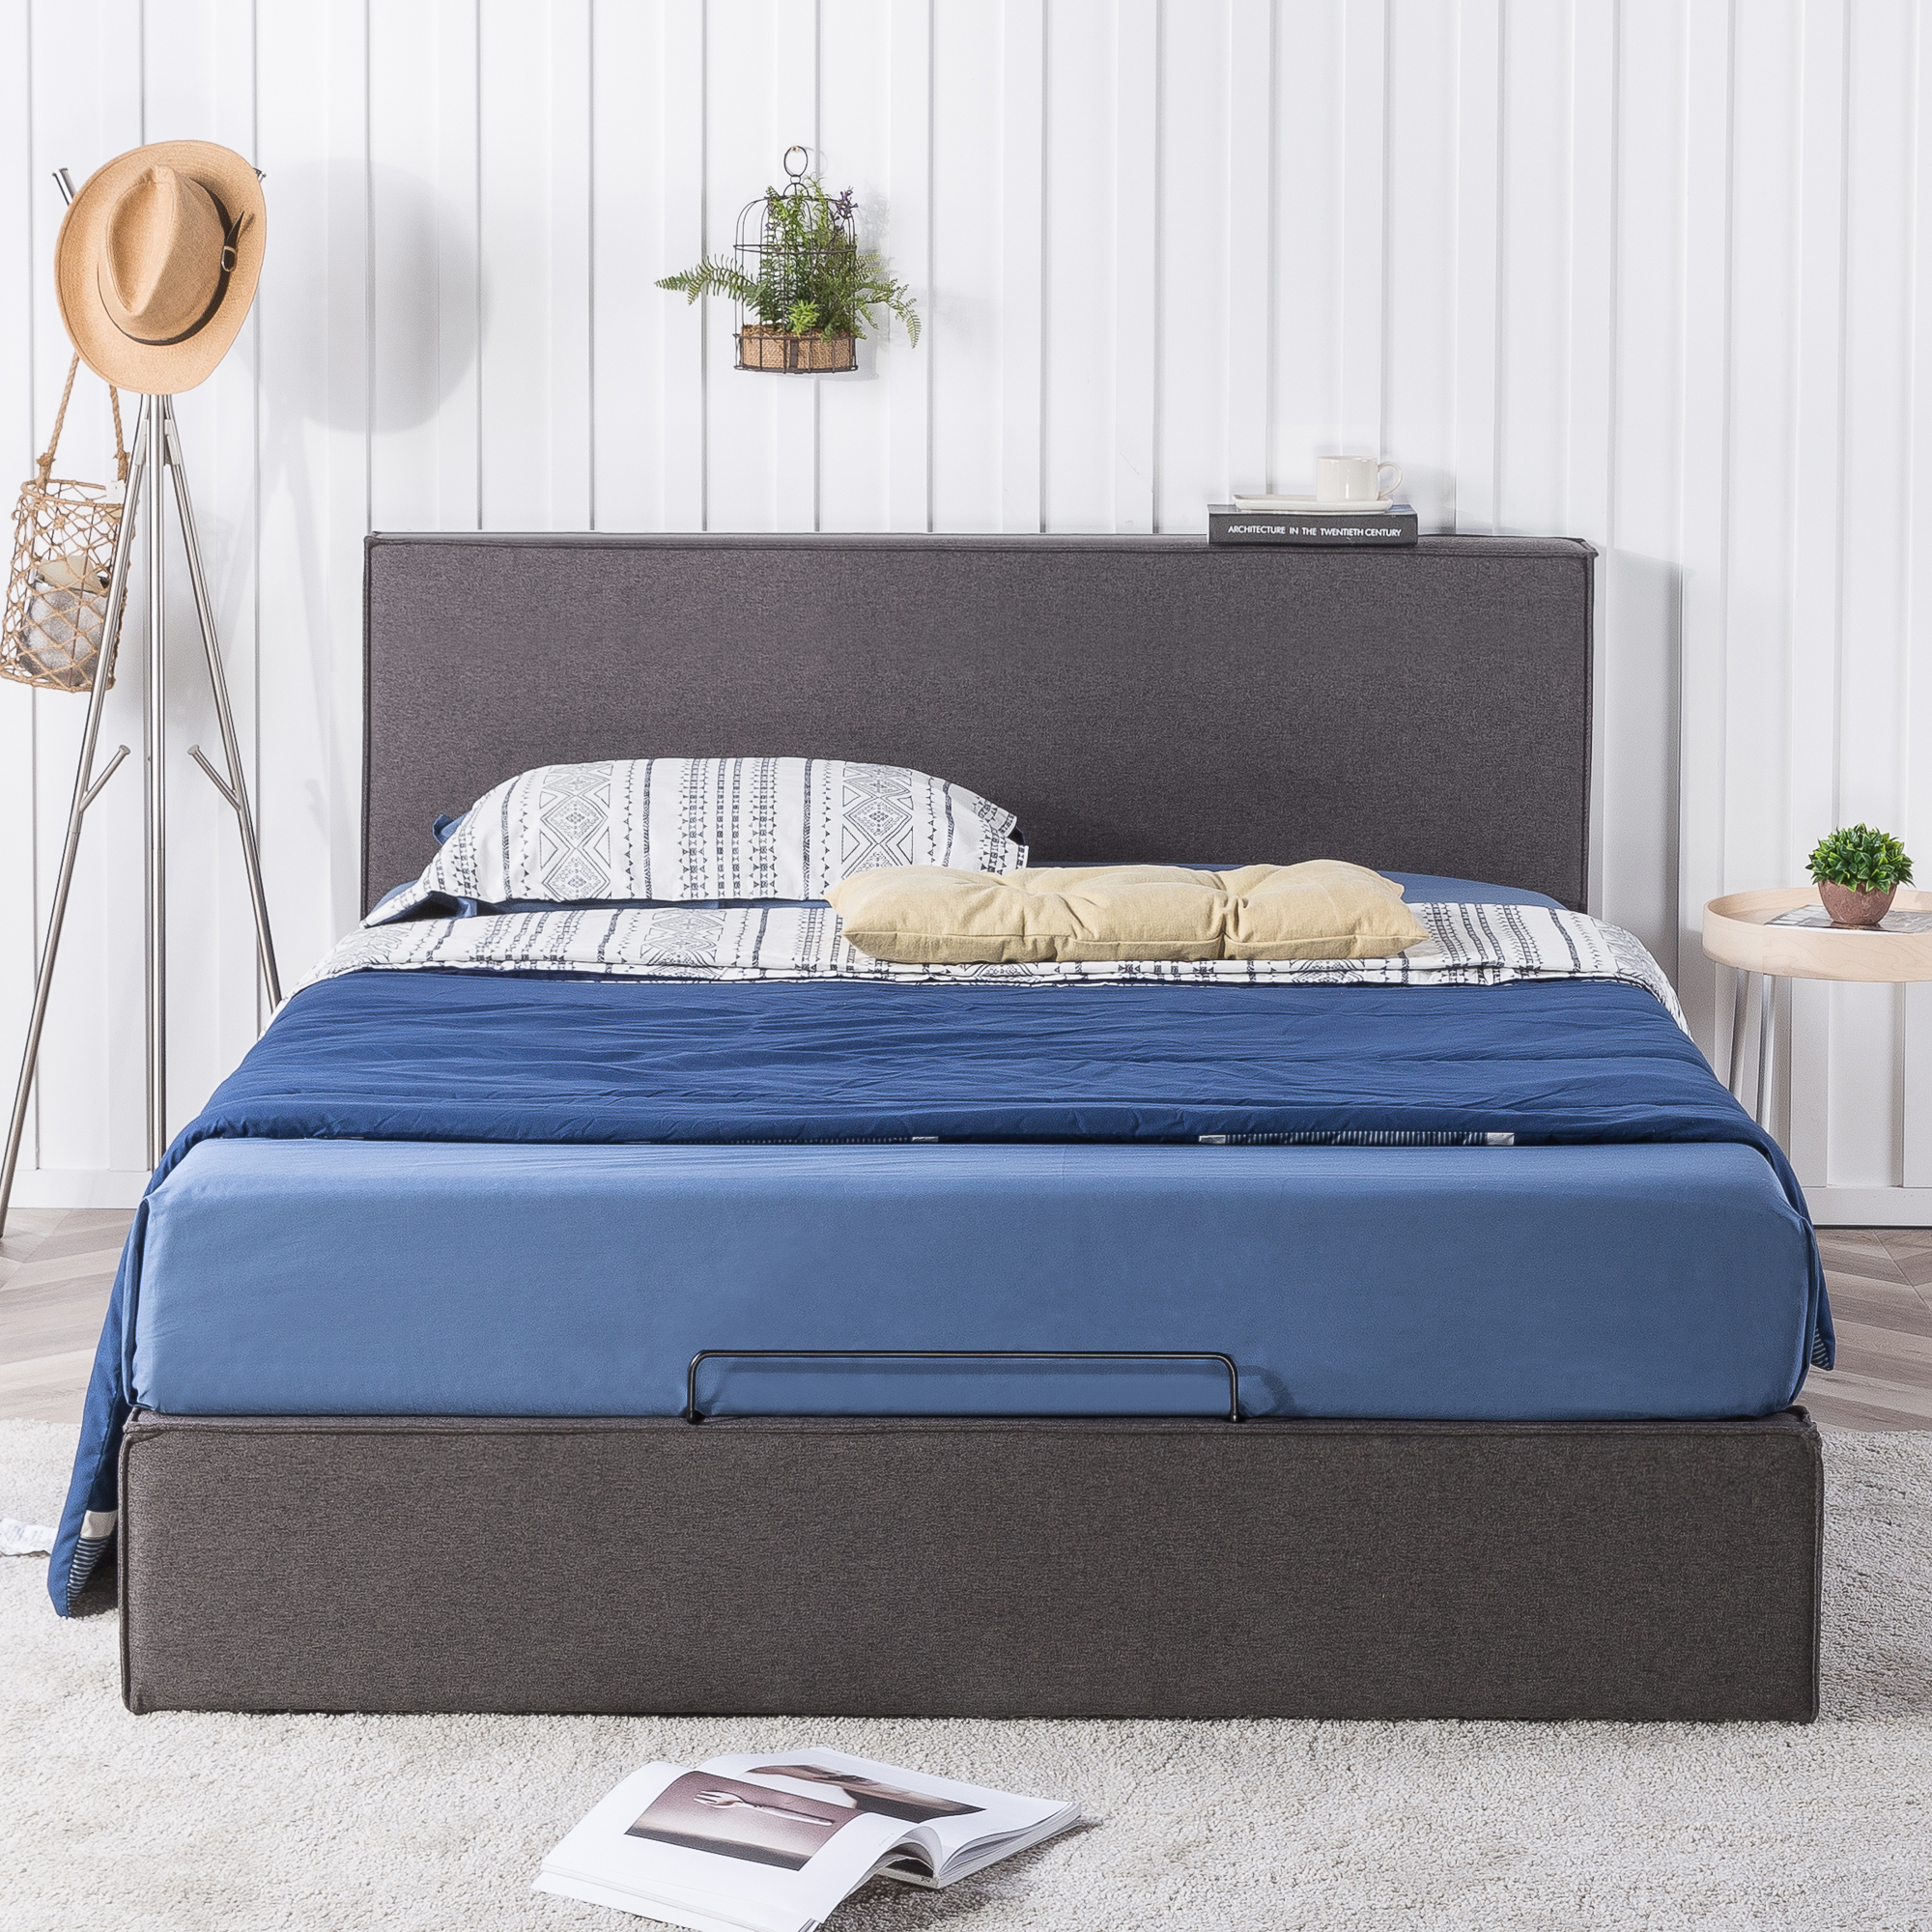 Zinus Finley 34" Upholstered Platform Bed with Lifting Storage, Full - image 2 of 11